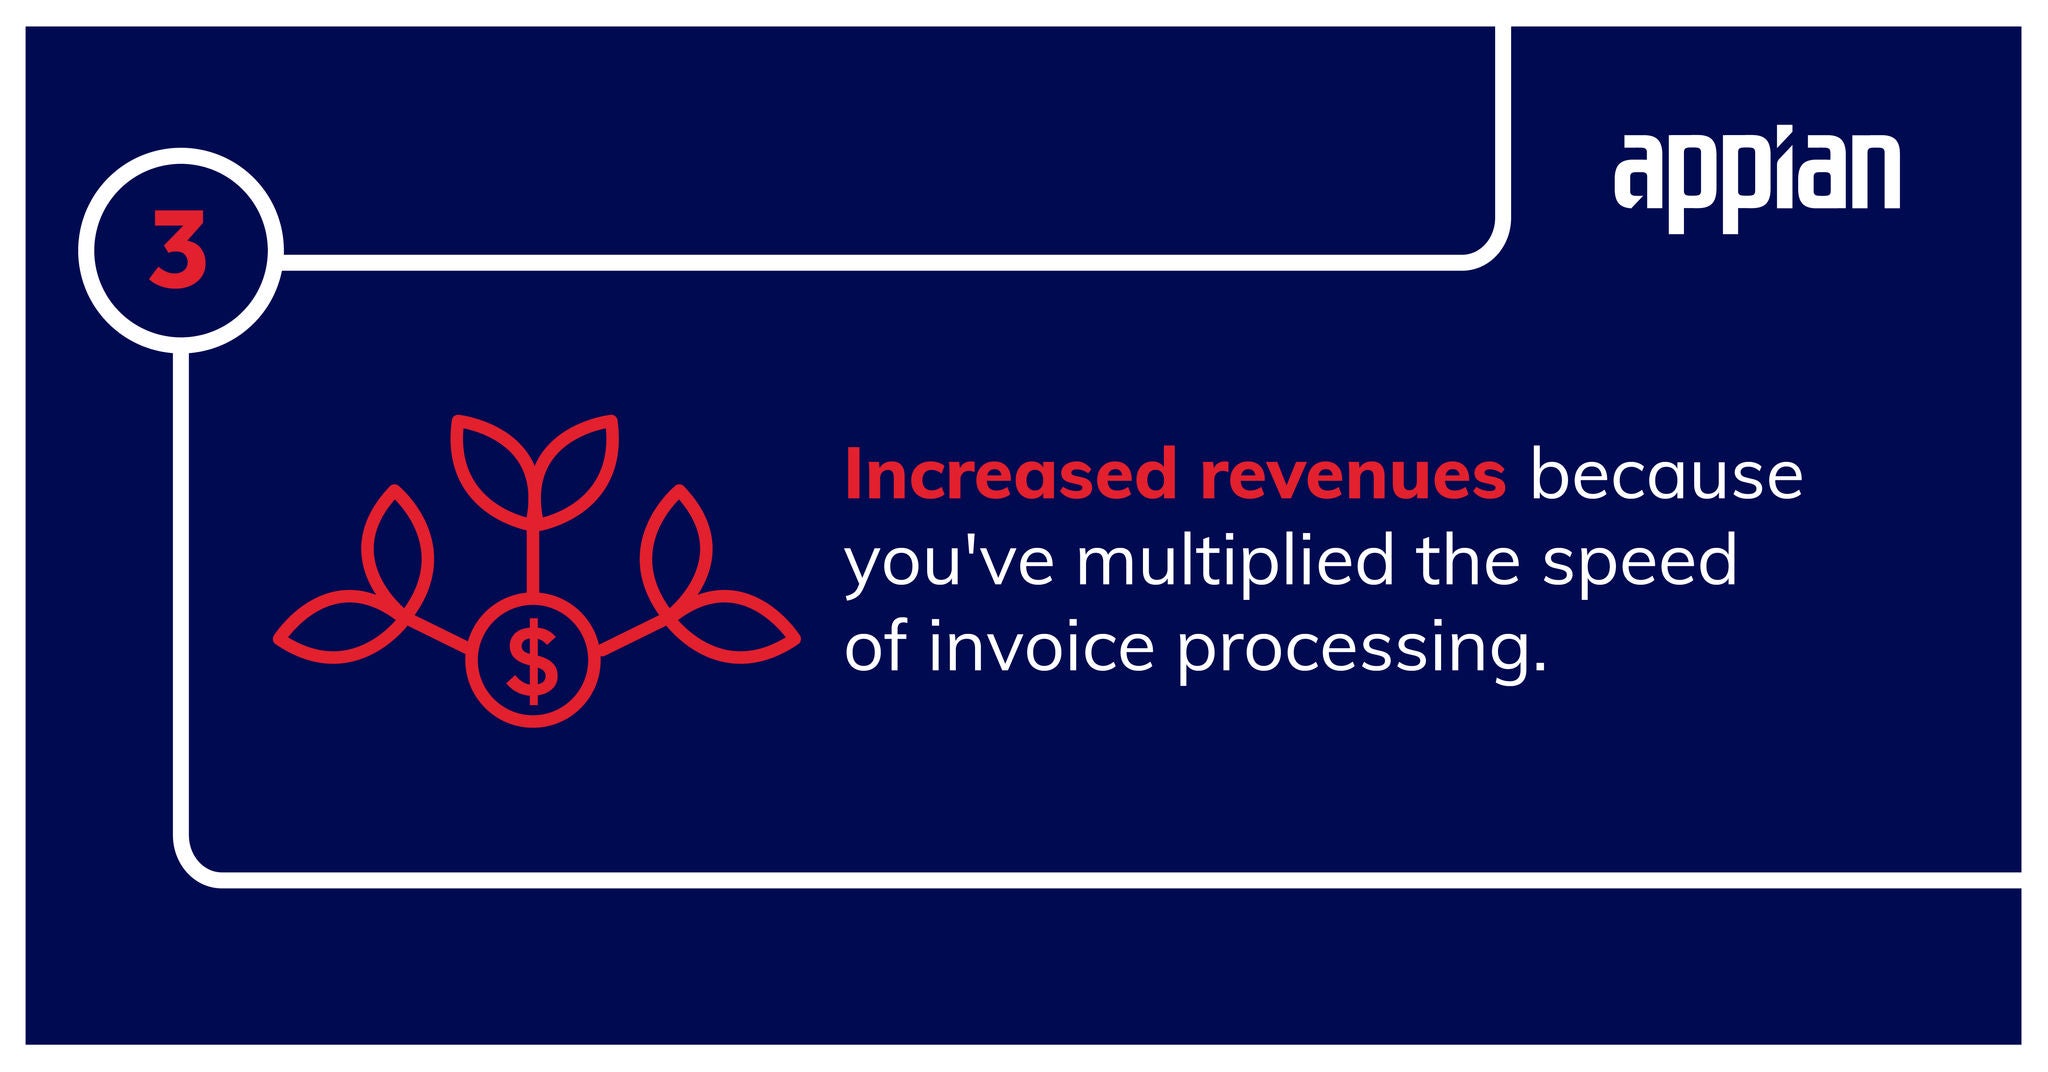 Increased revenues because you’ve multiplied the speed of invoice processing.